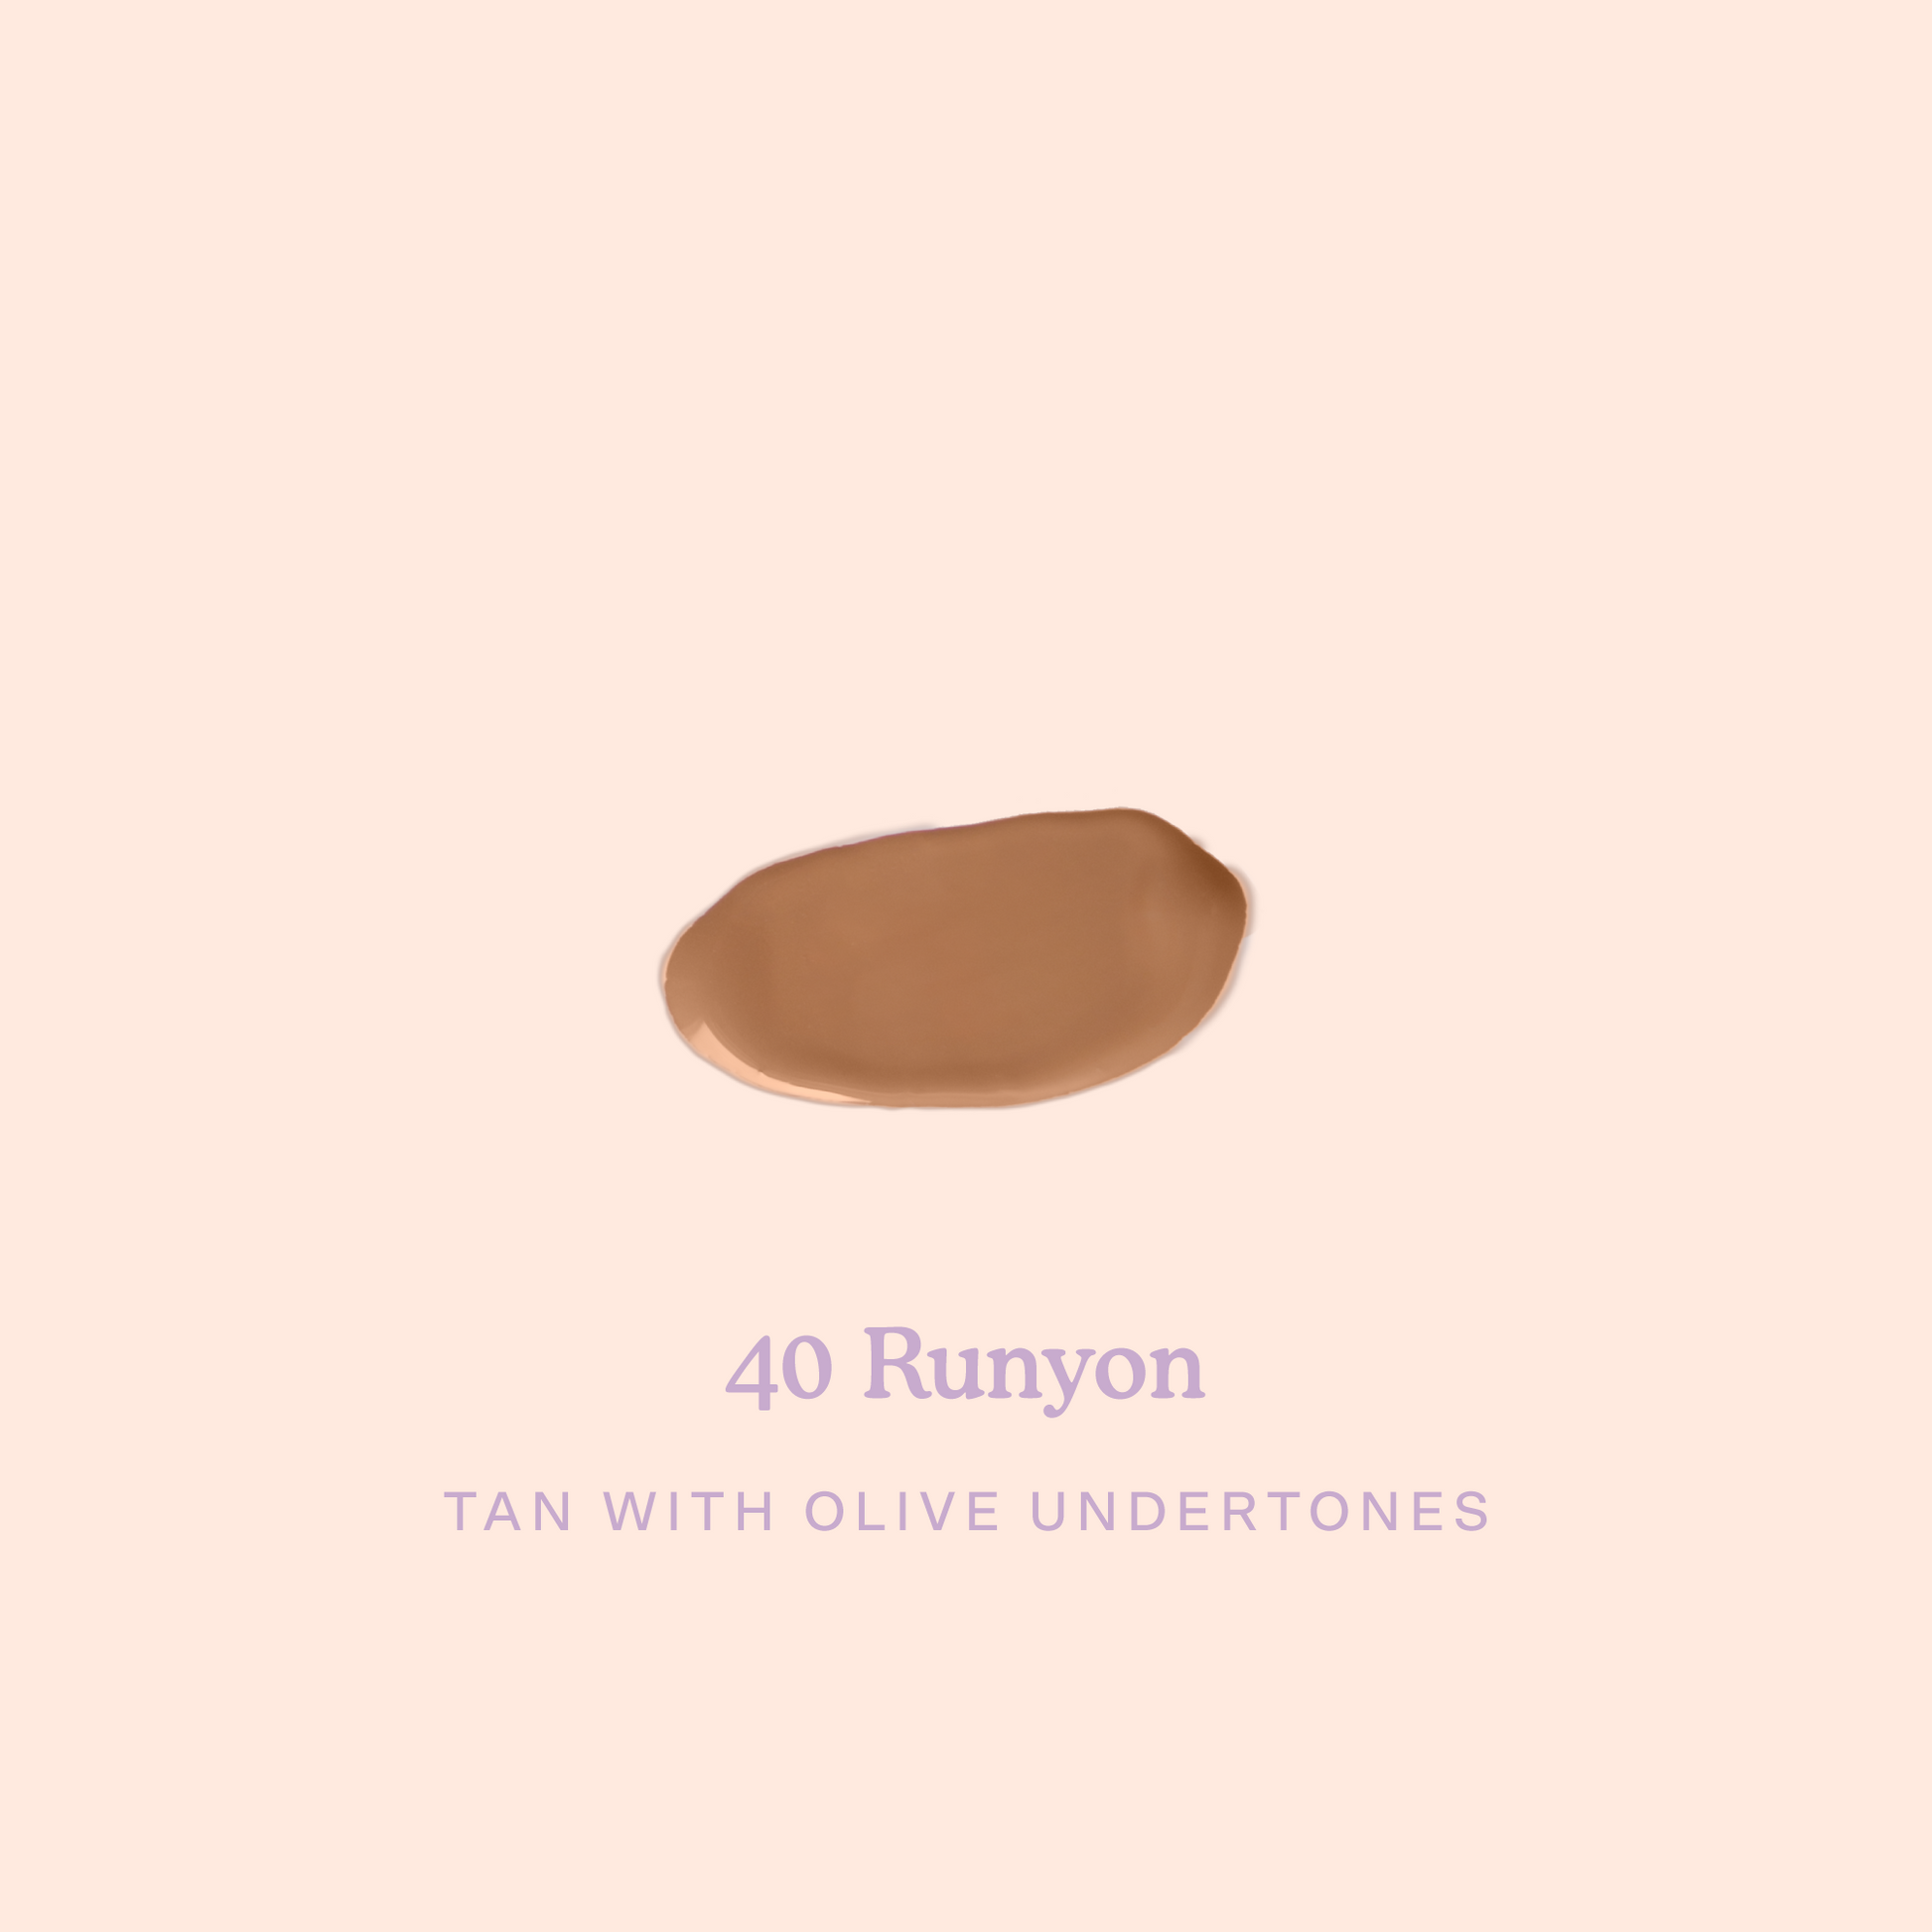 Tower 28 Beauty SunnyDays™ Tinted SPF 30 in the shade 40 Runyon